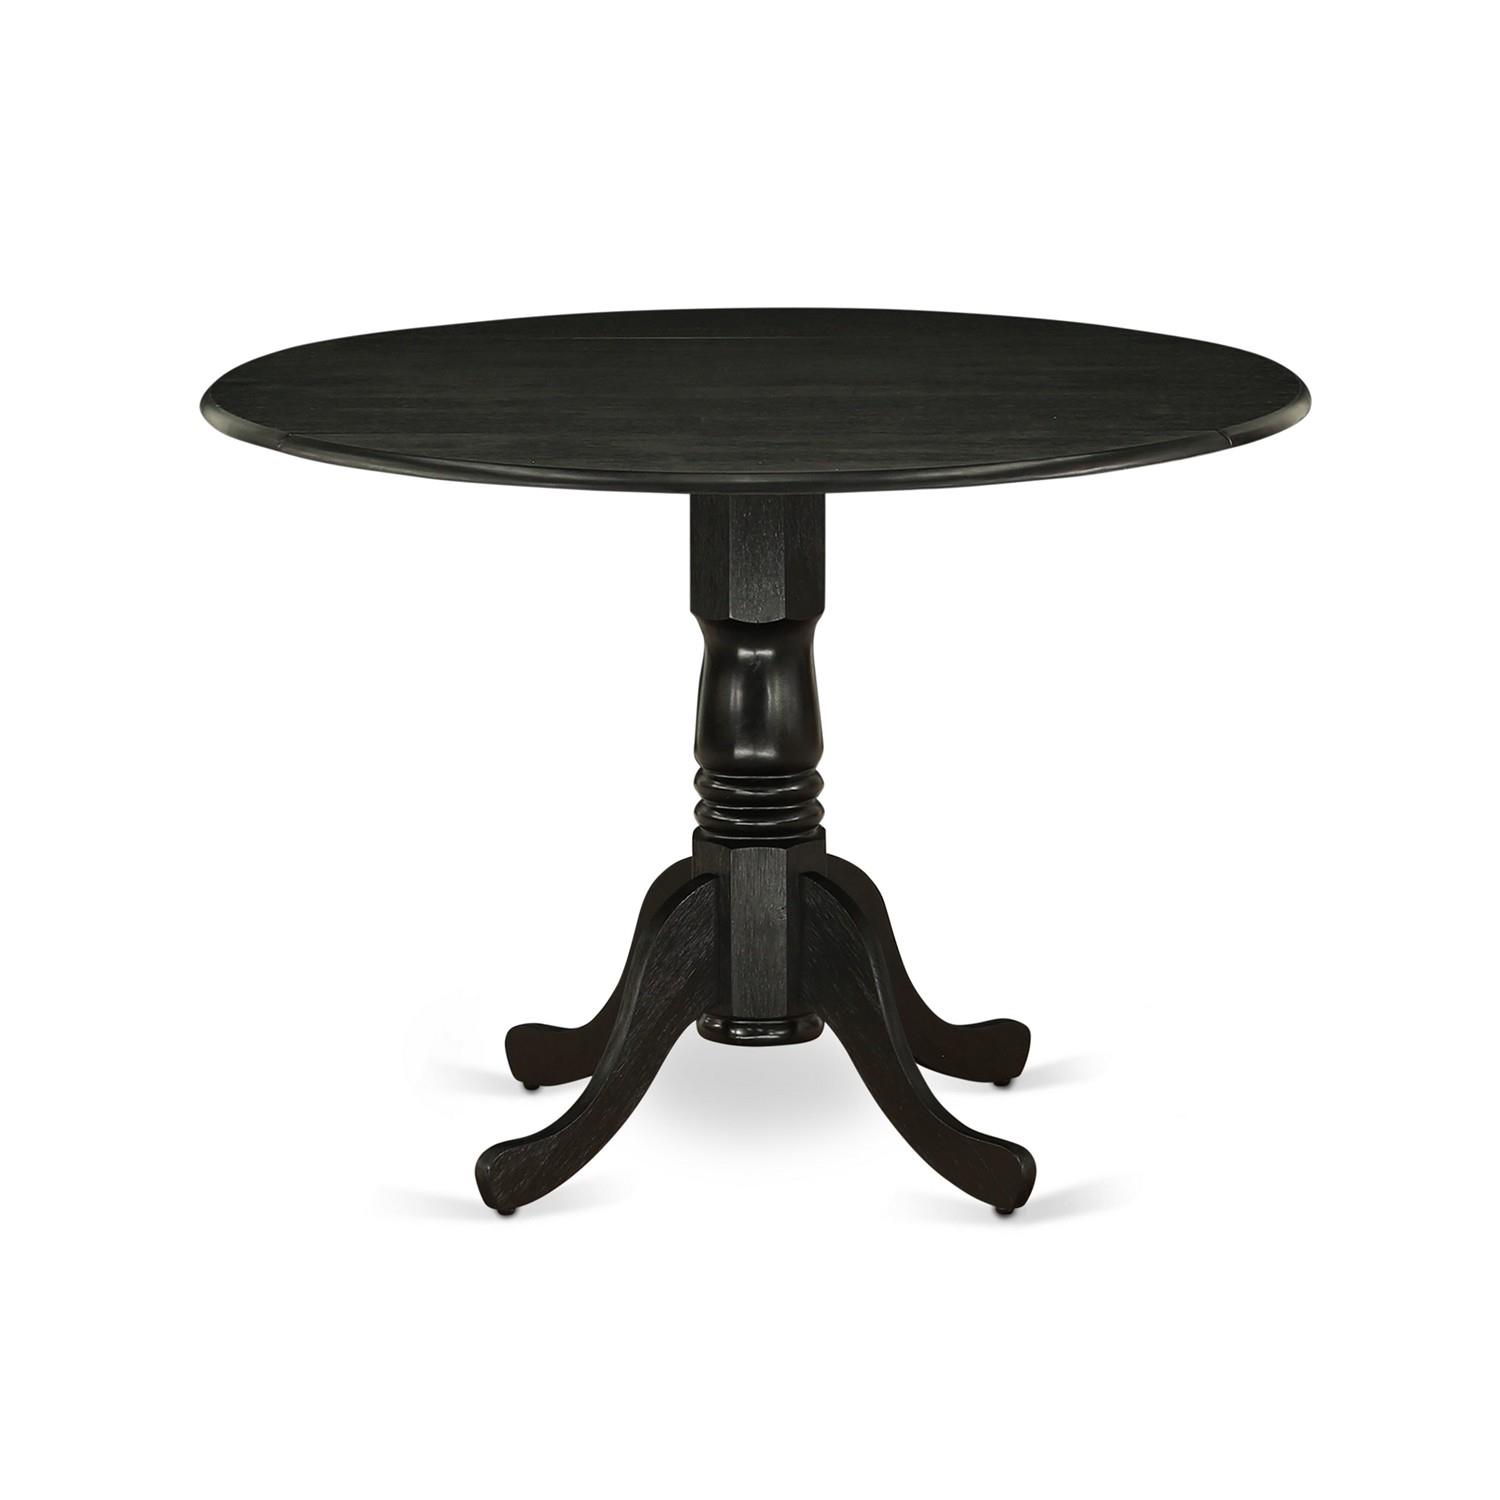 East West Furniture Dublin Wood Table With Pedestal In Black Finish DMT-ABK-TP